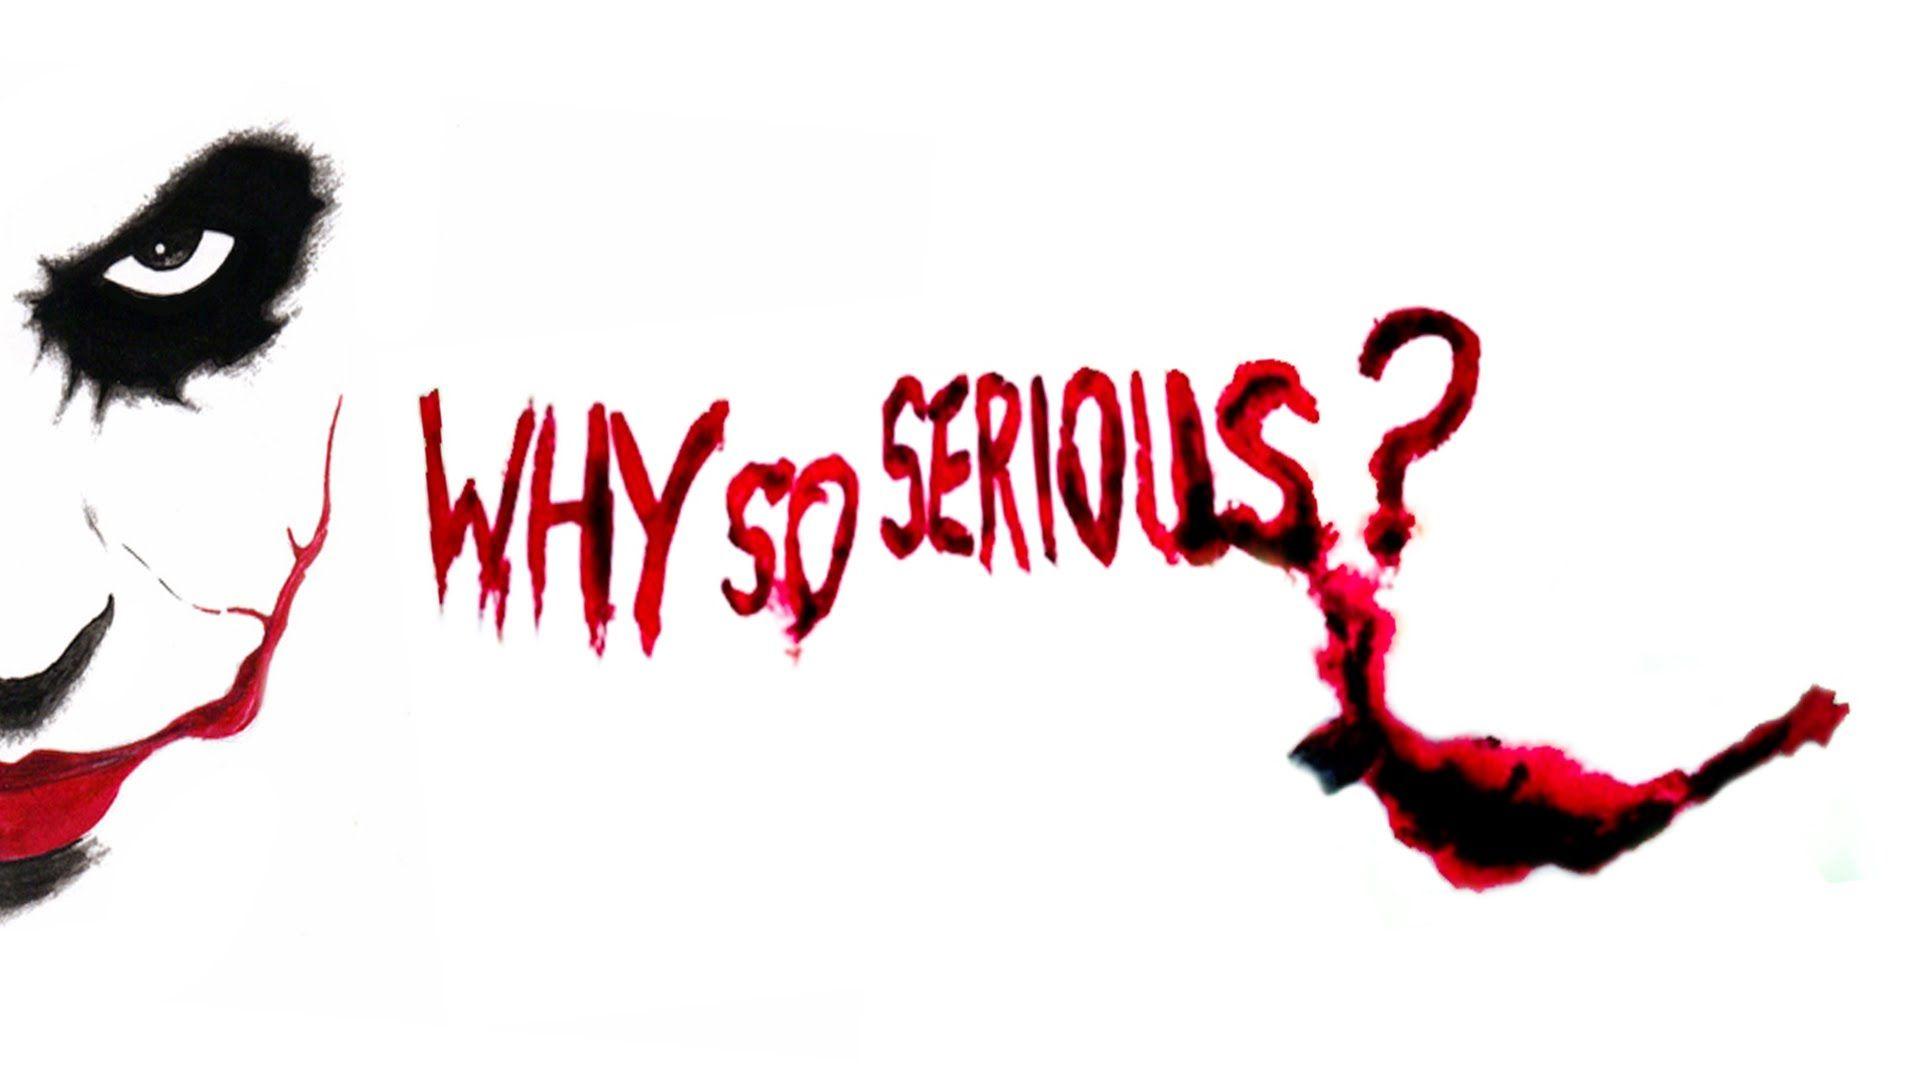 Why do serious. Why so serious надпись.